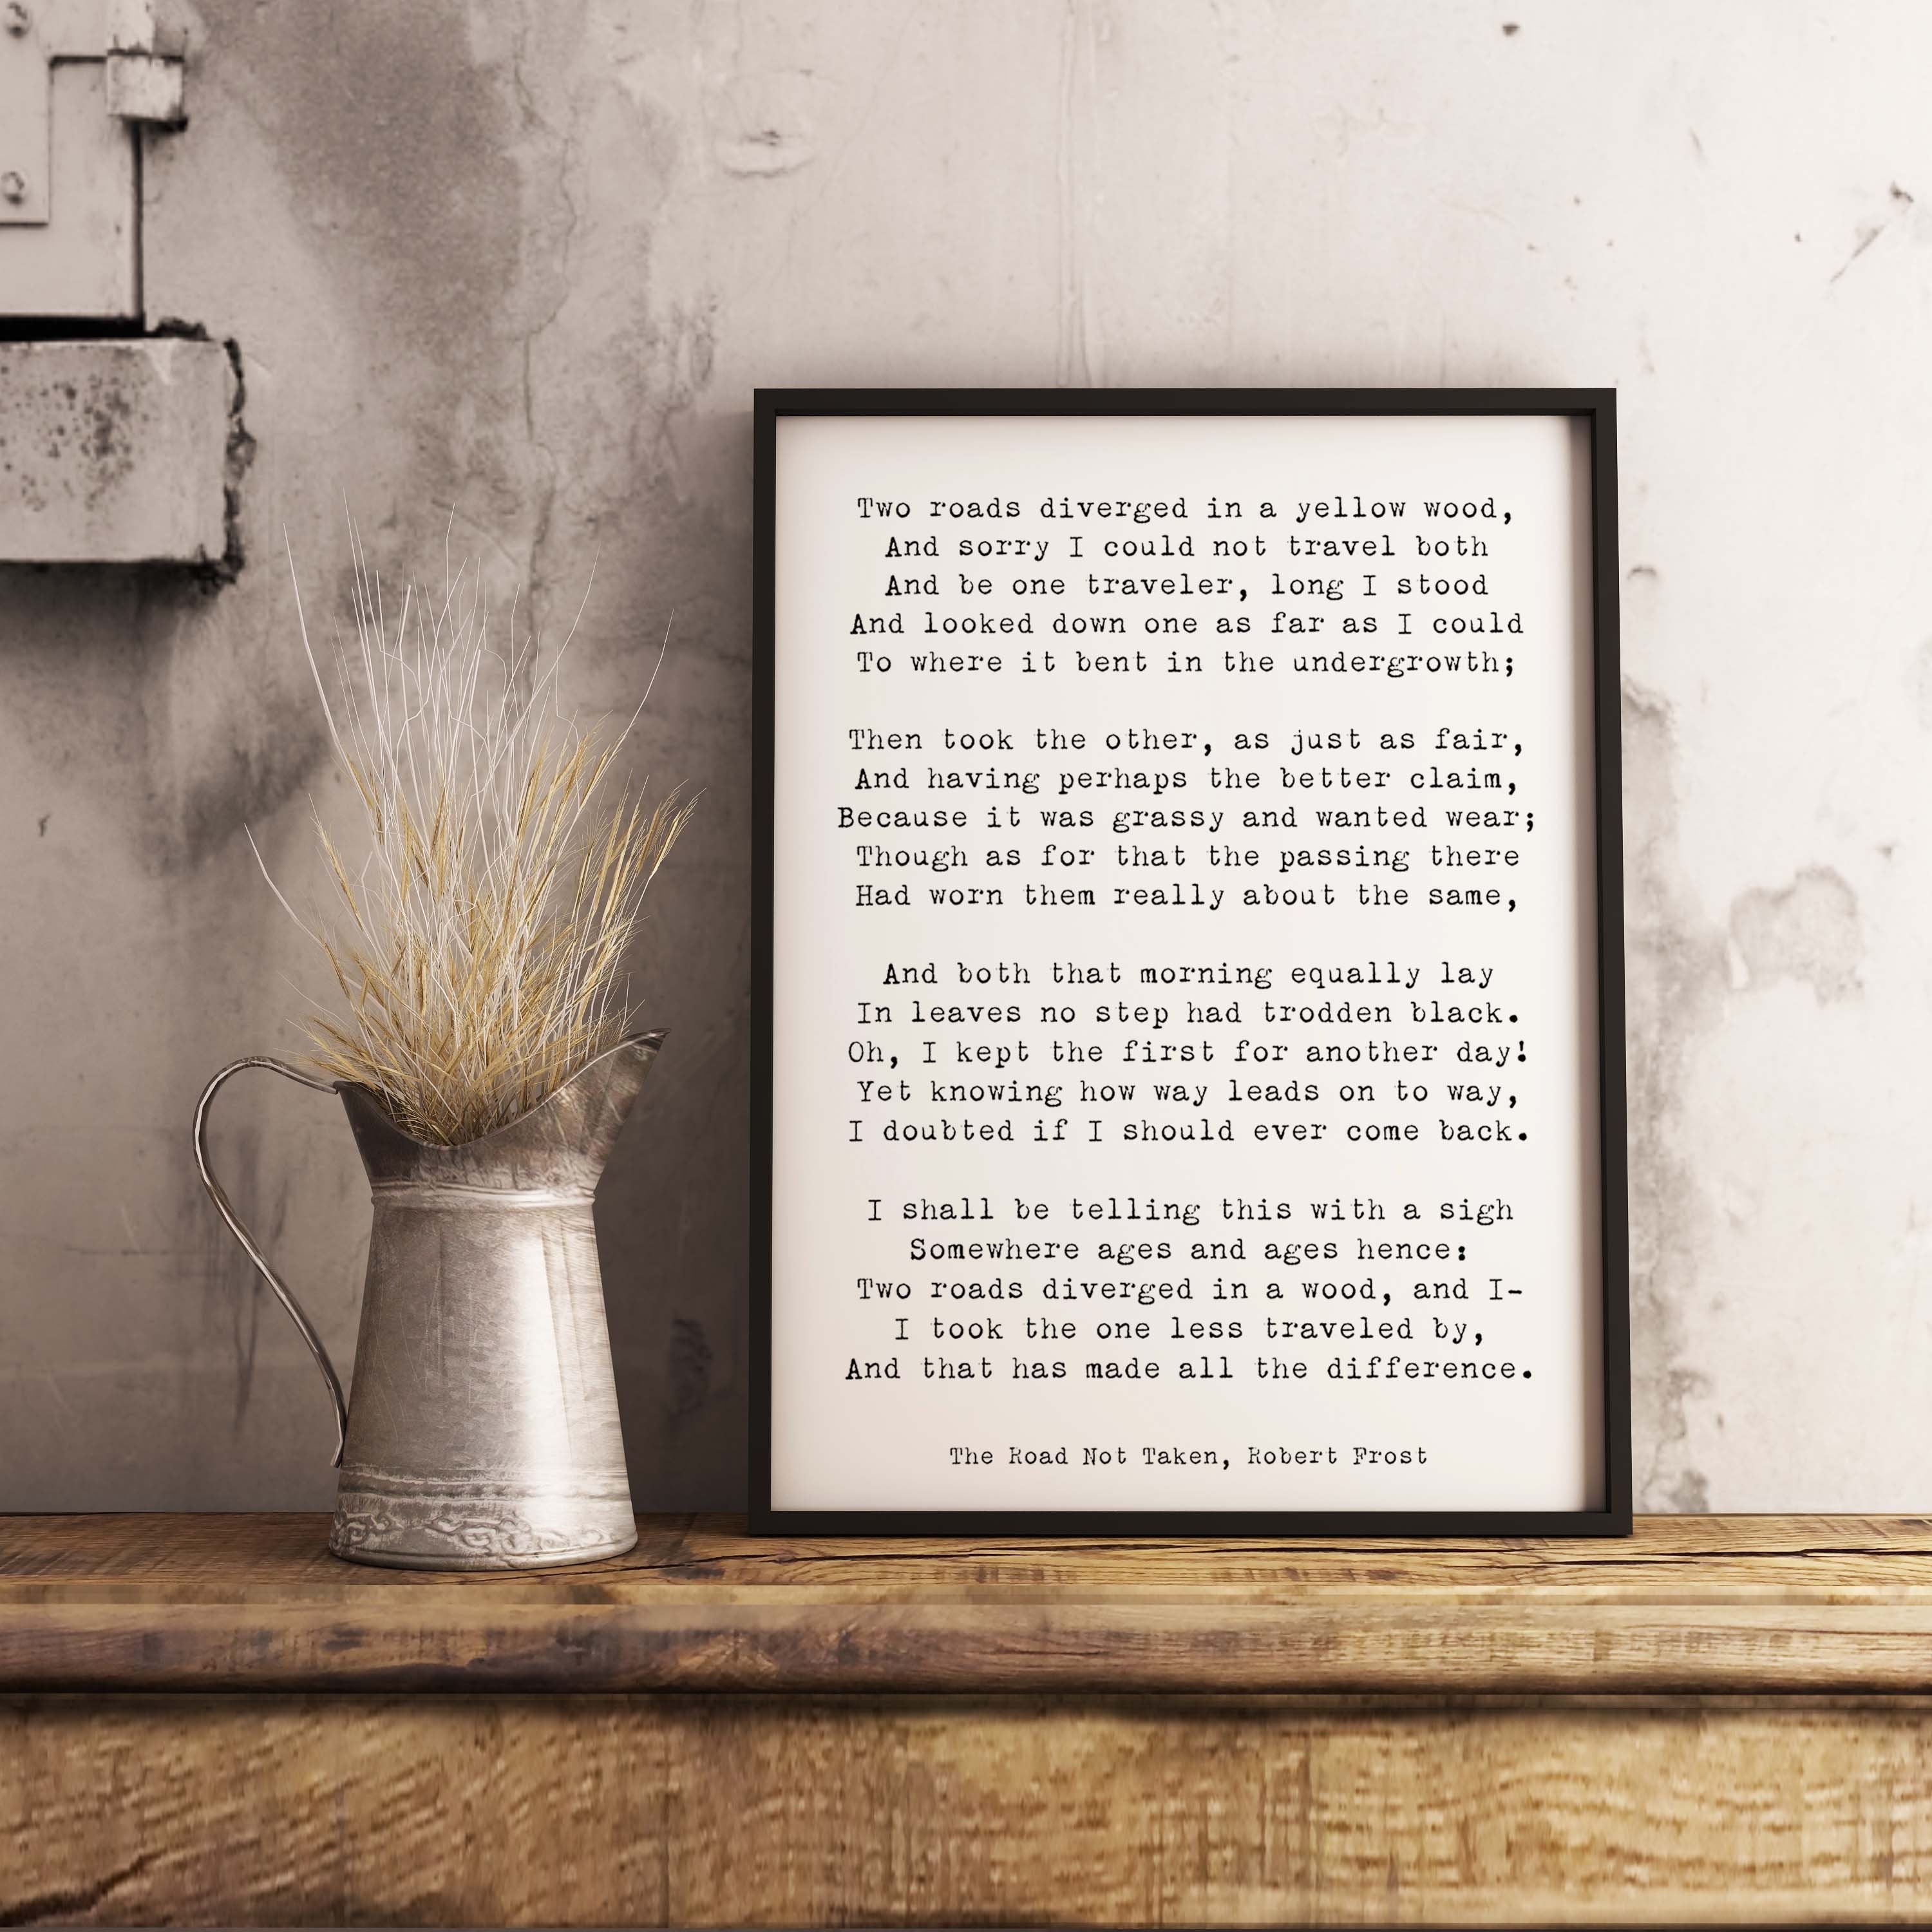 Robert Frost Framed Art, The Road Not Taken Poem Framed Poster, Two Roads Diverged in a Yellow Wood Poetry Print - BookQuoteDecor